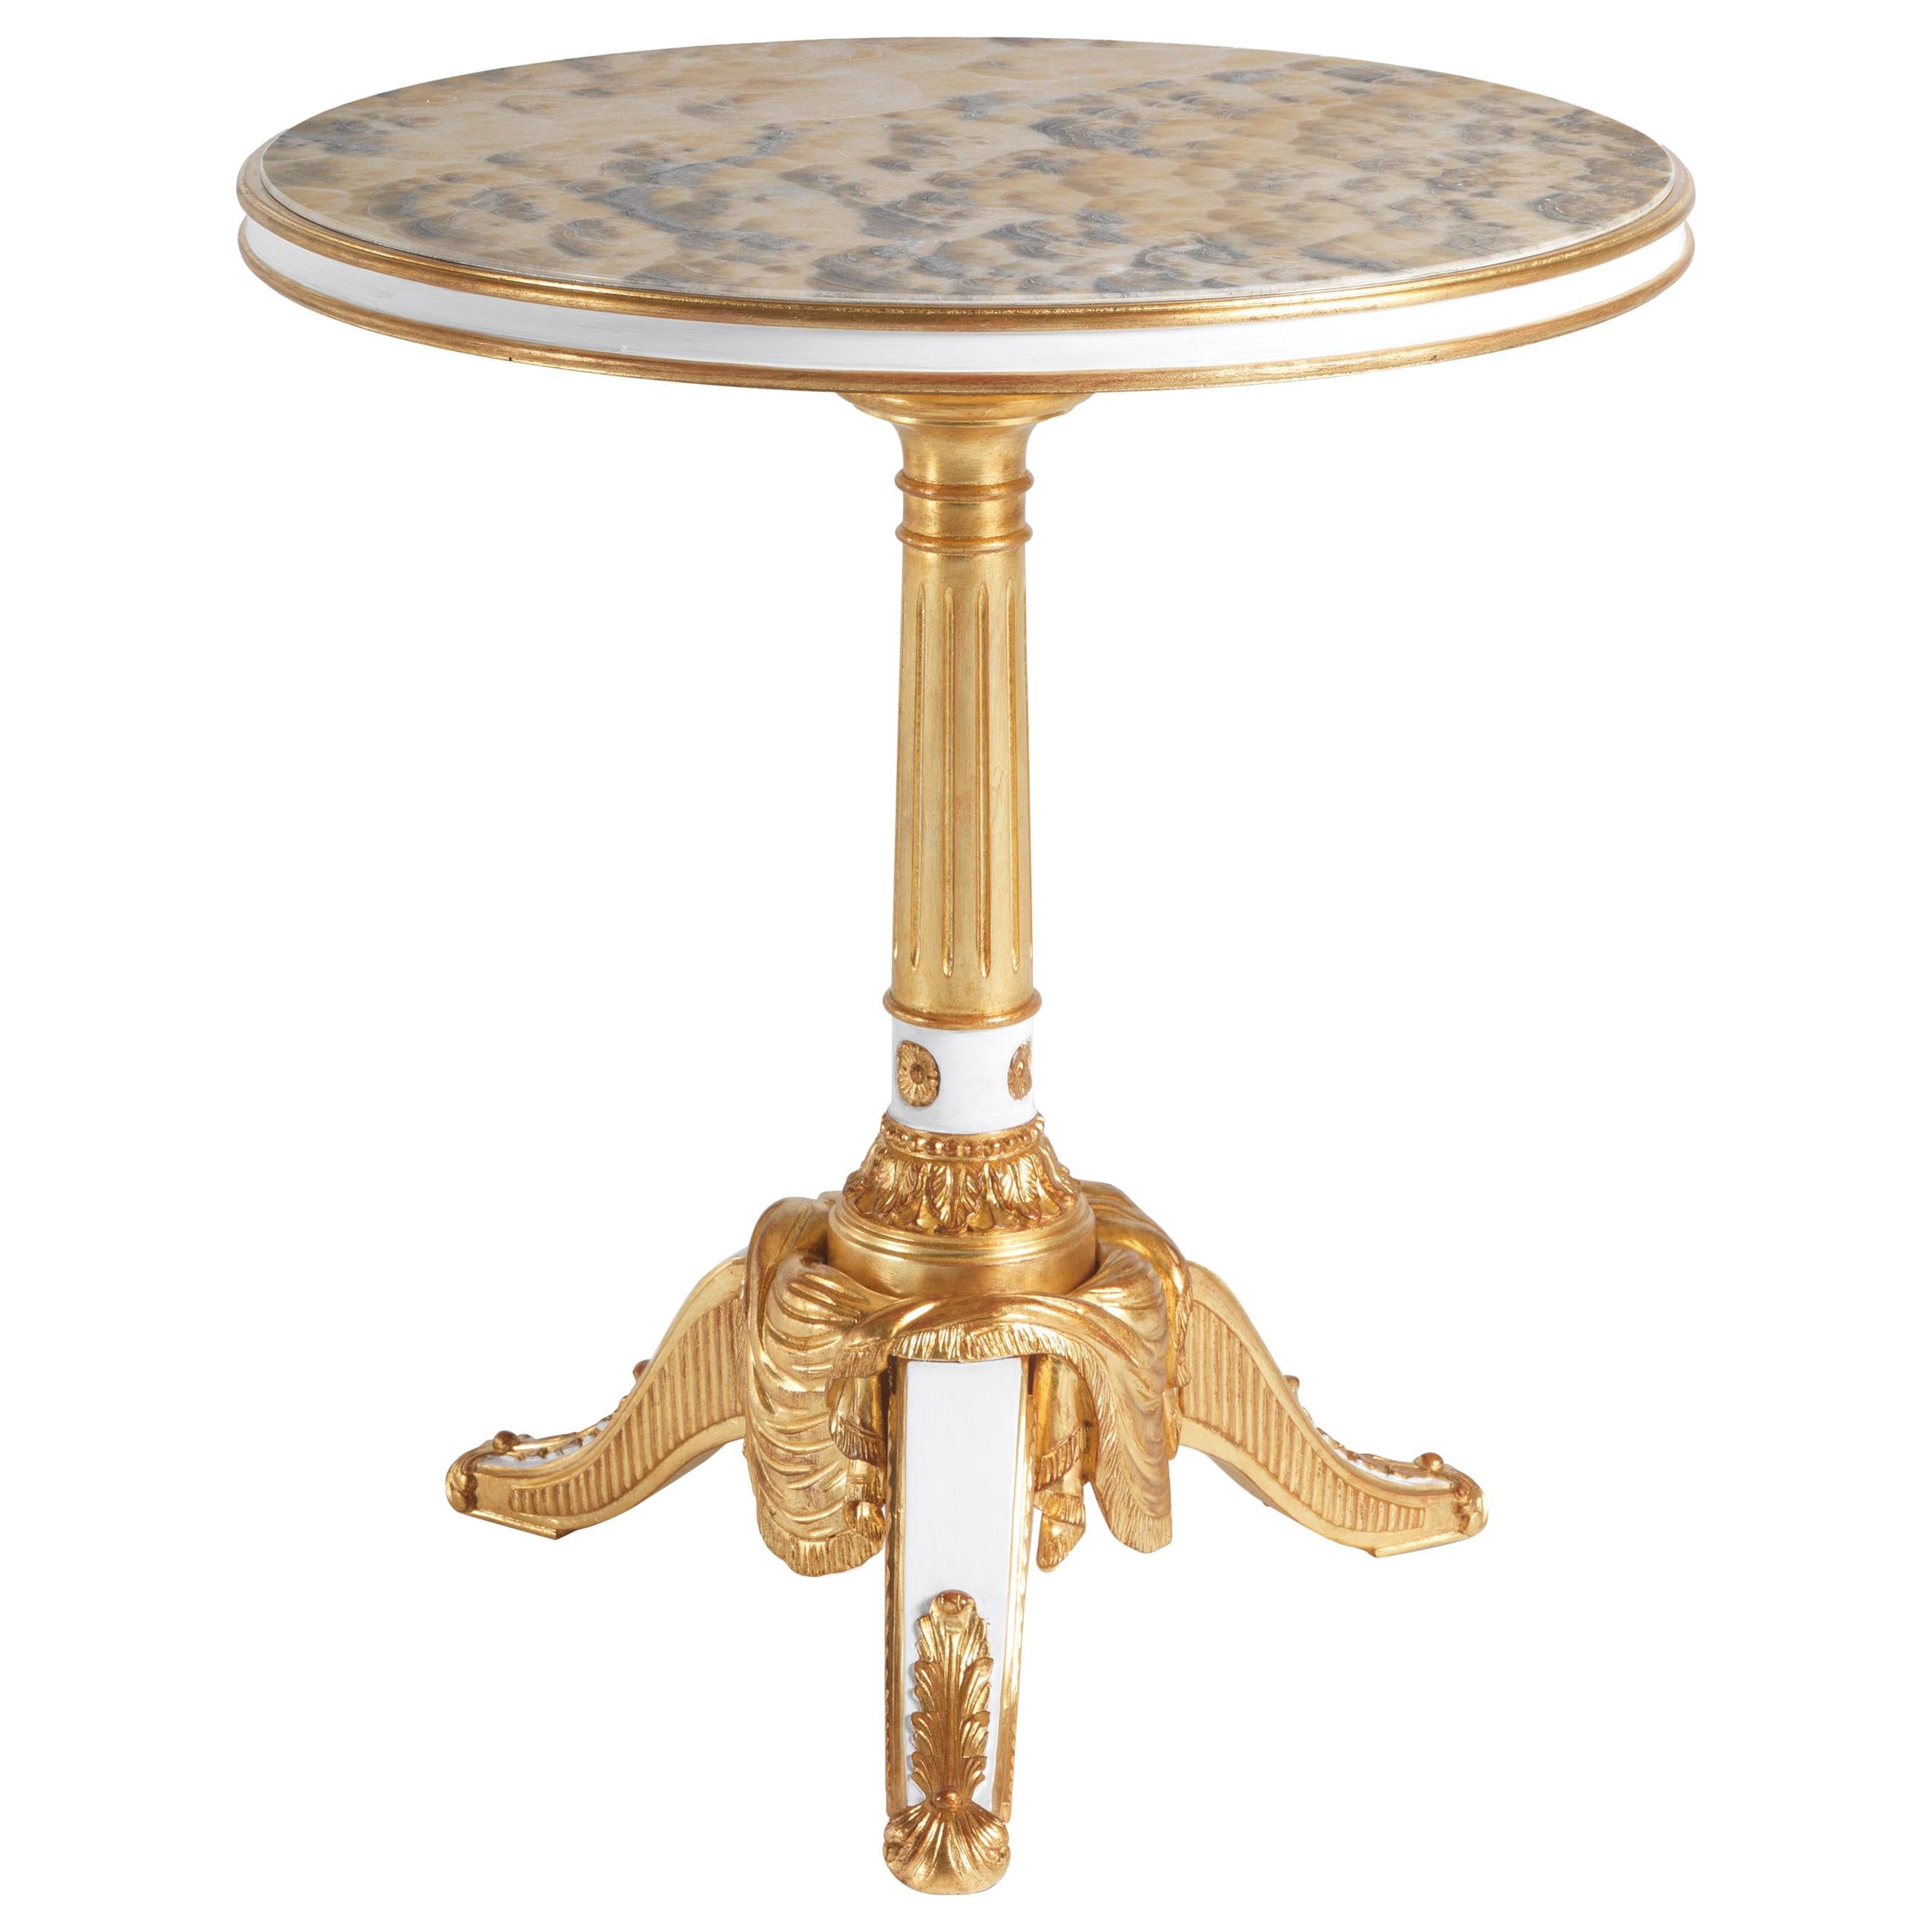 21st Century Lace Side Table in Hand-carved Wood and Cloudy Onyx Top